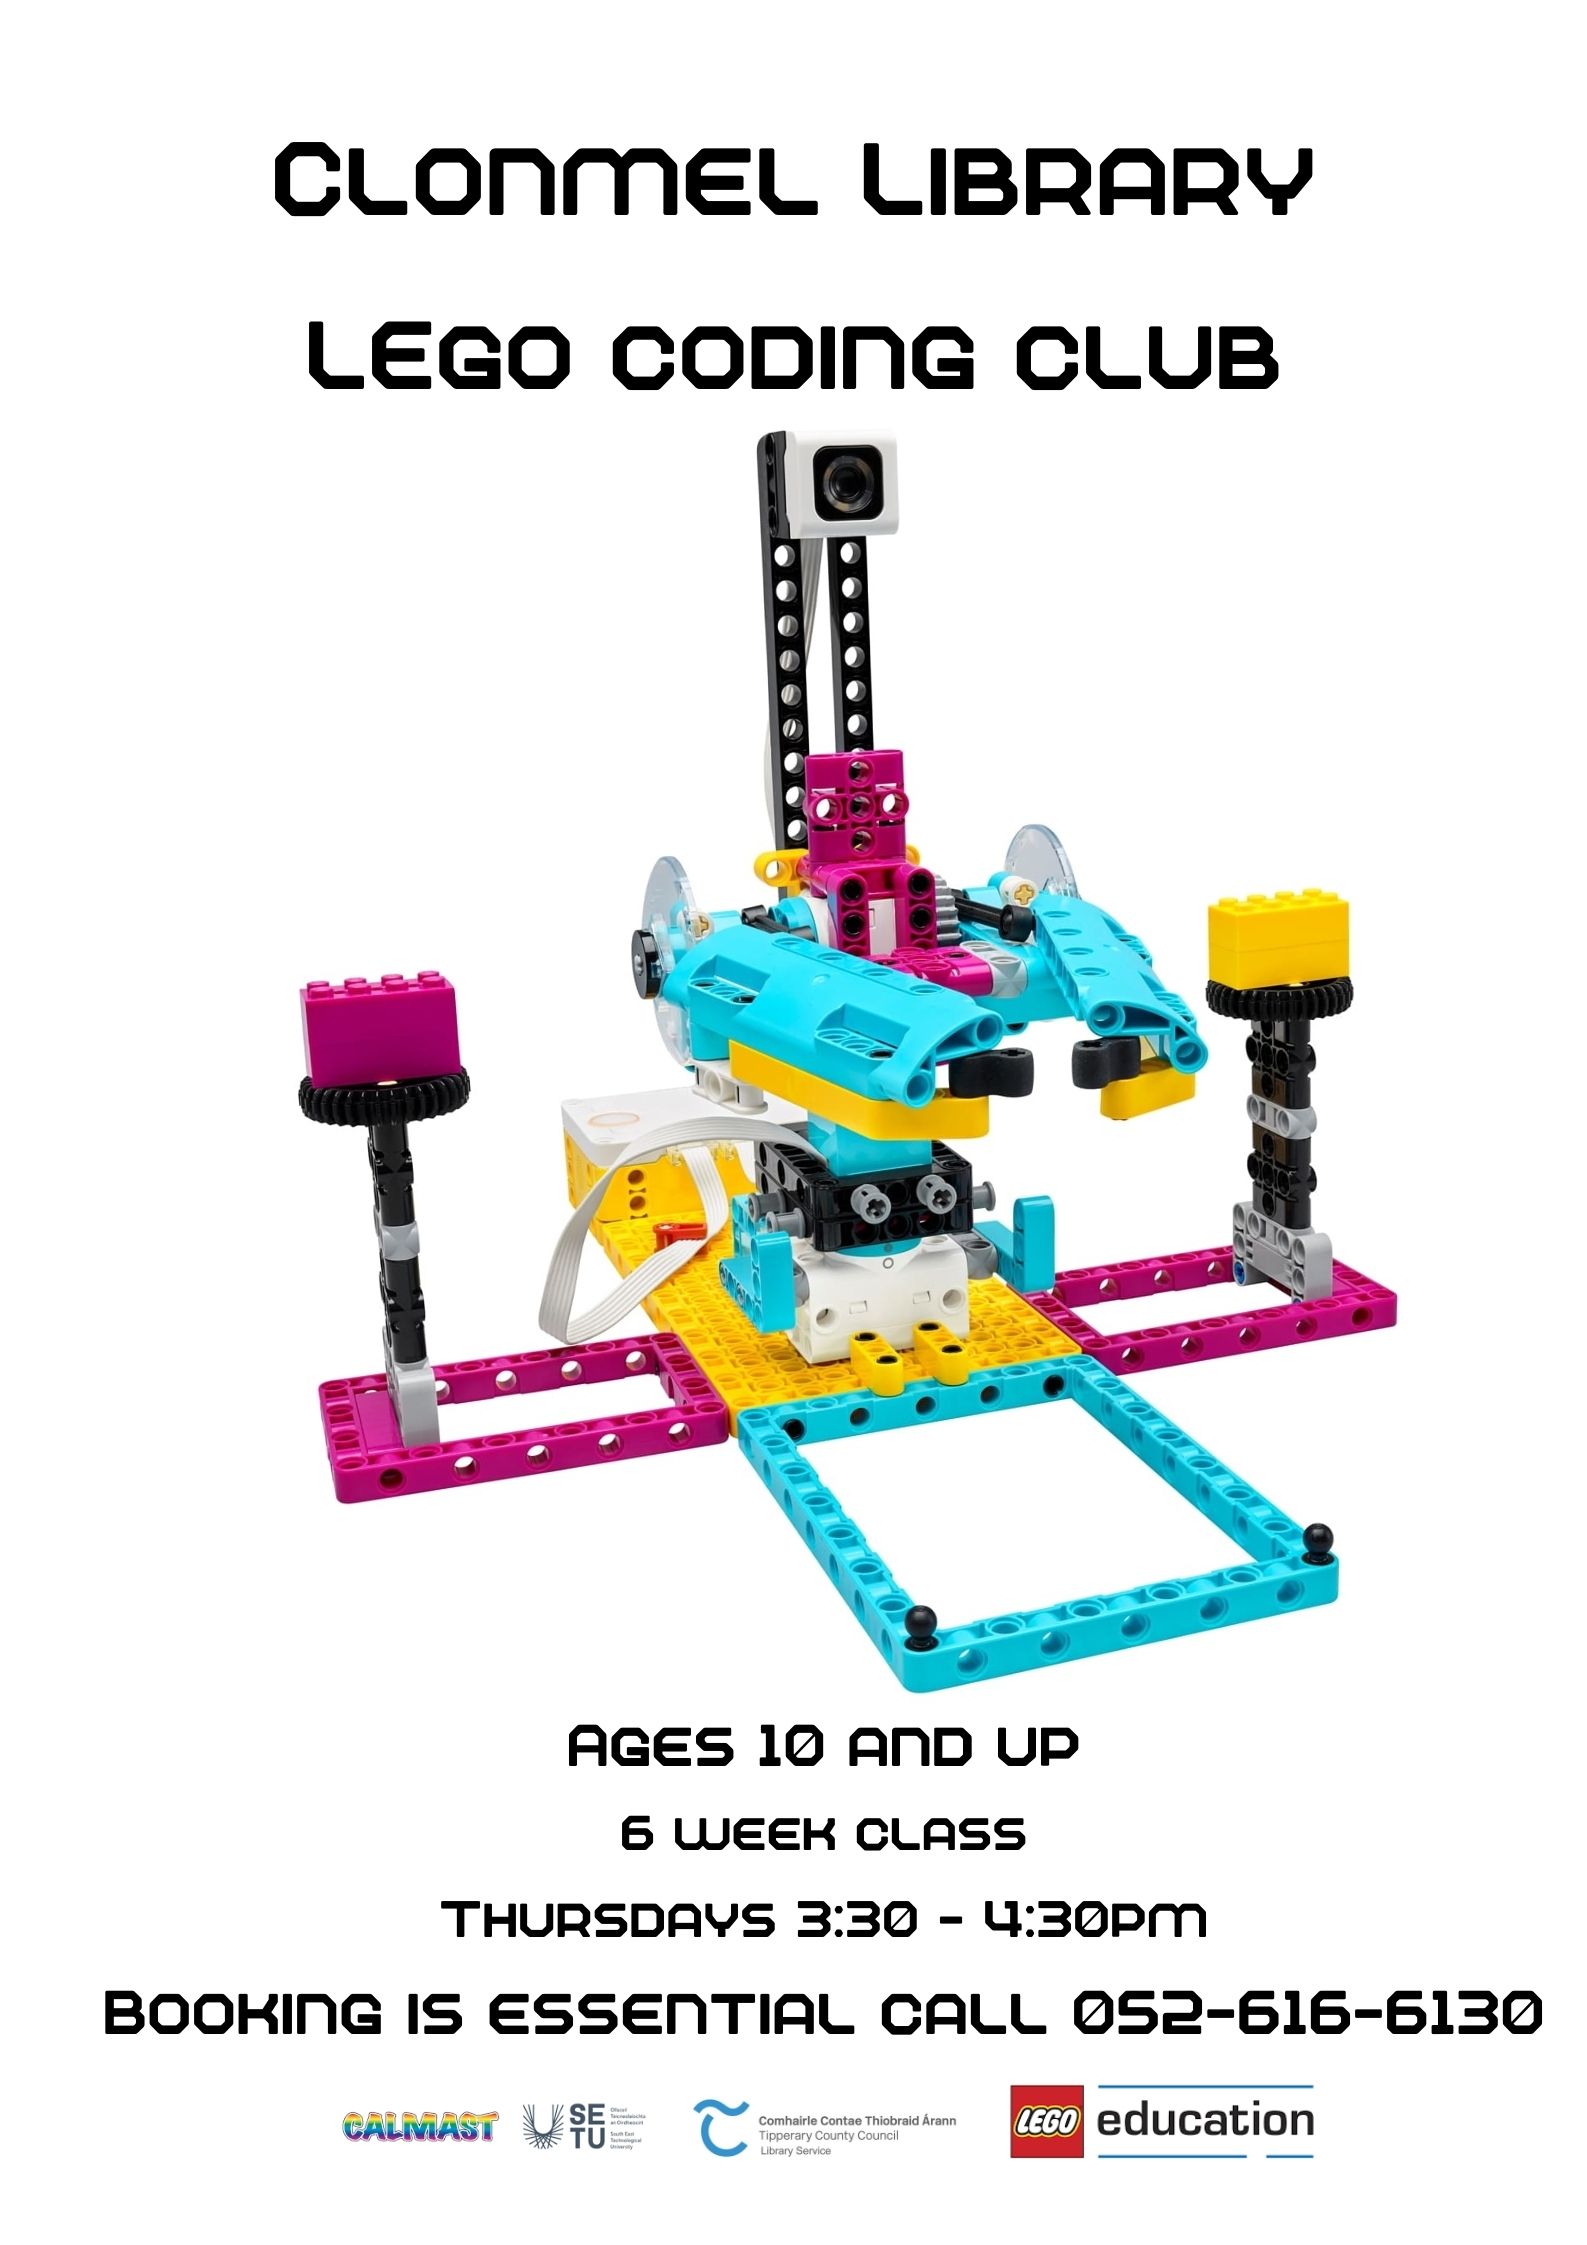 poster for clonmel library lego coding every thursday at 3:30